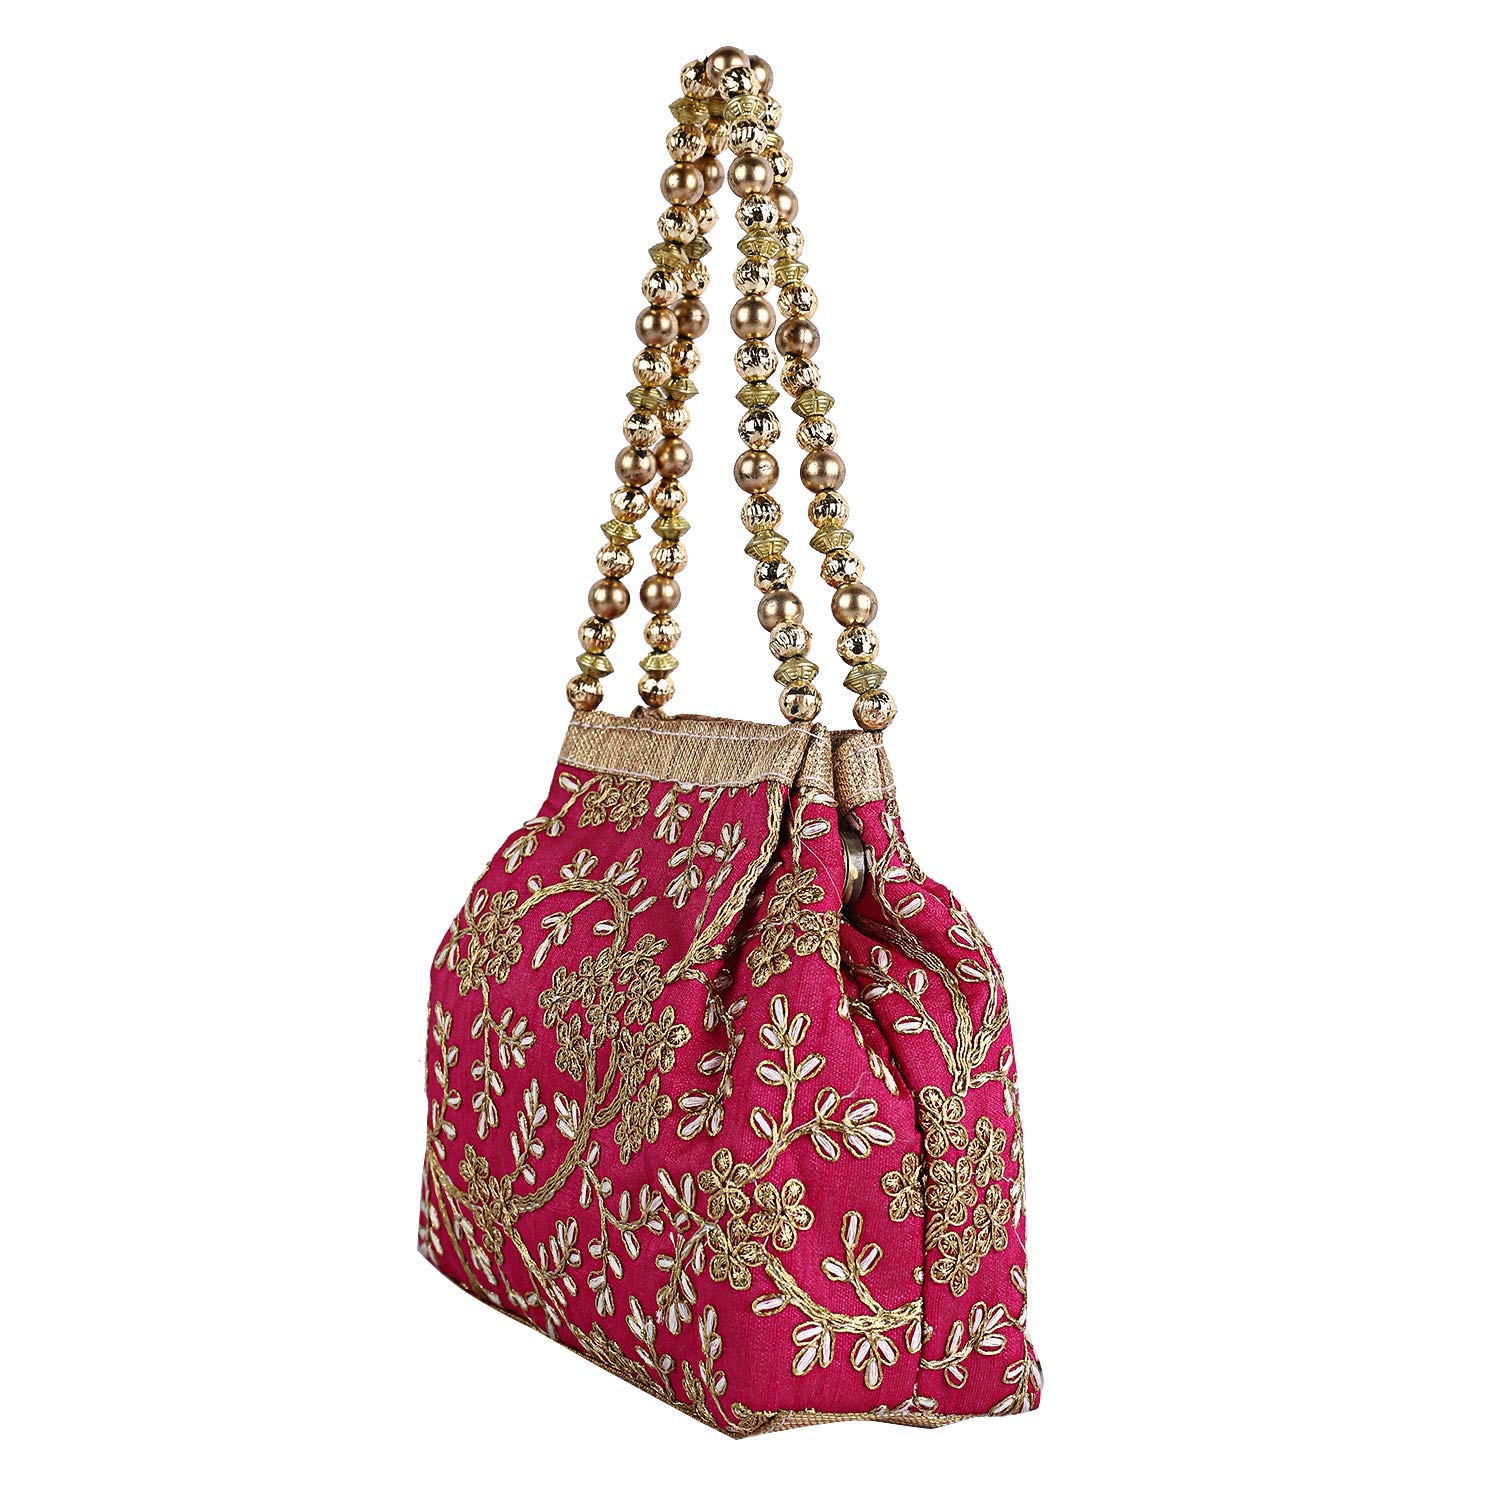 Kuber Industries Attractive Embroidery Polyester Hand Purse & Artificial Pearls Handle With 3 Magnetic Lock for Woman,Girls (Pink)